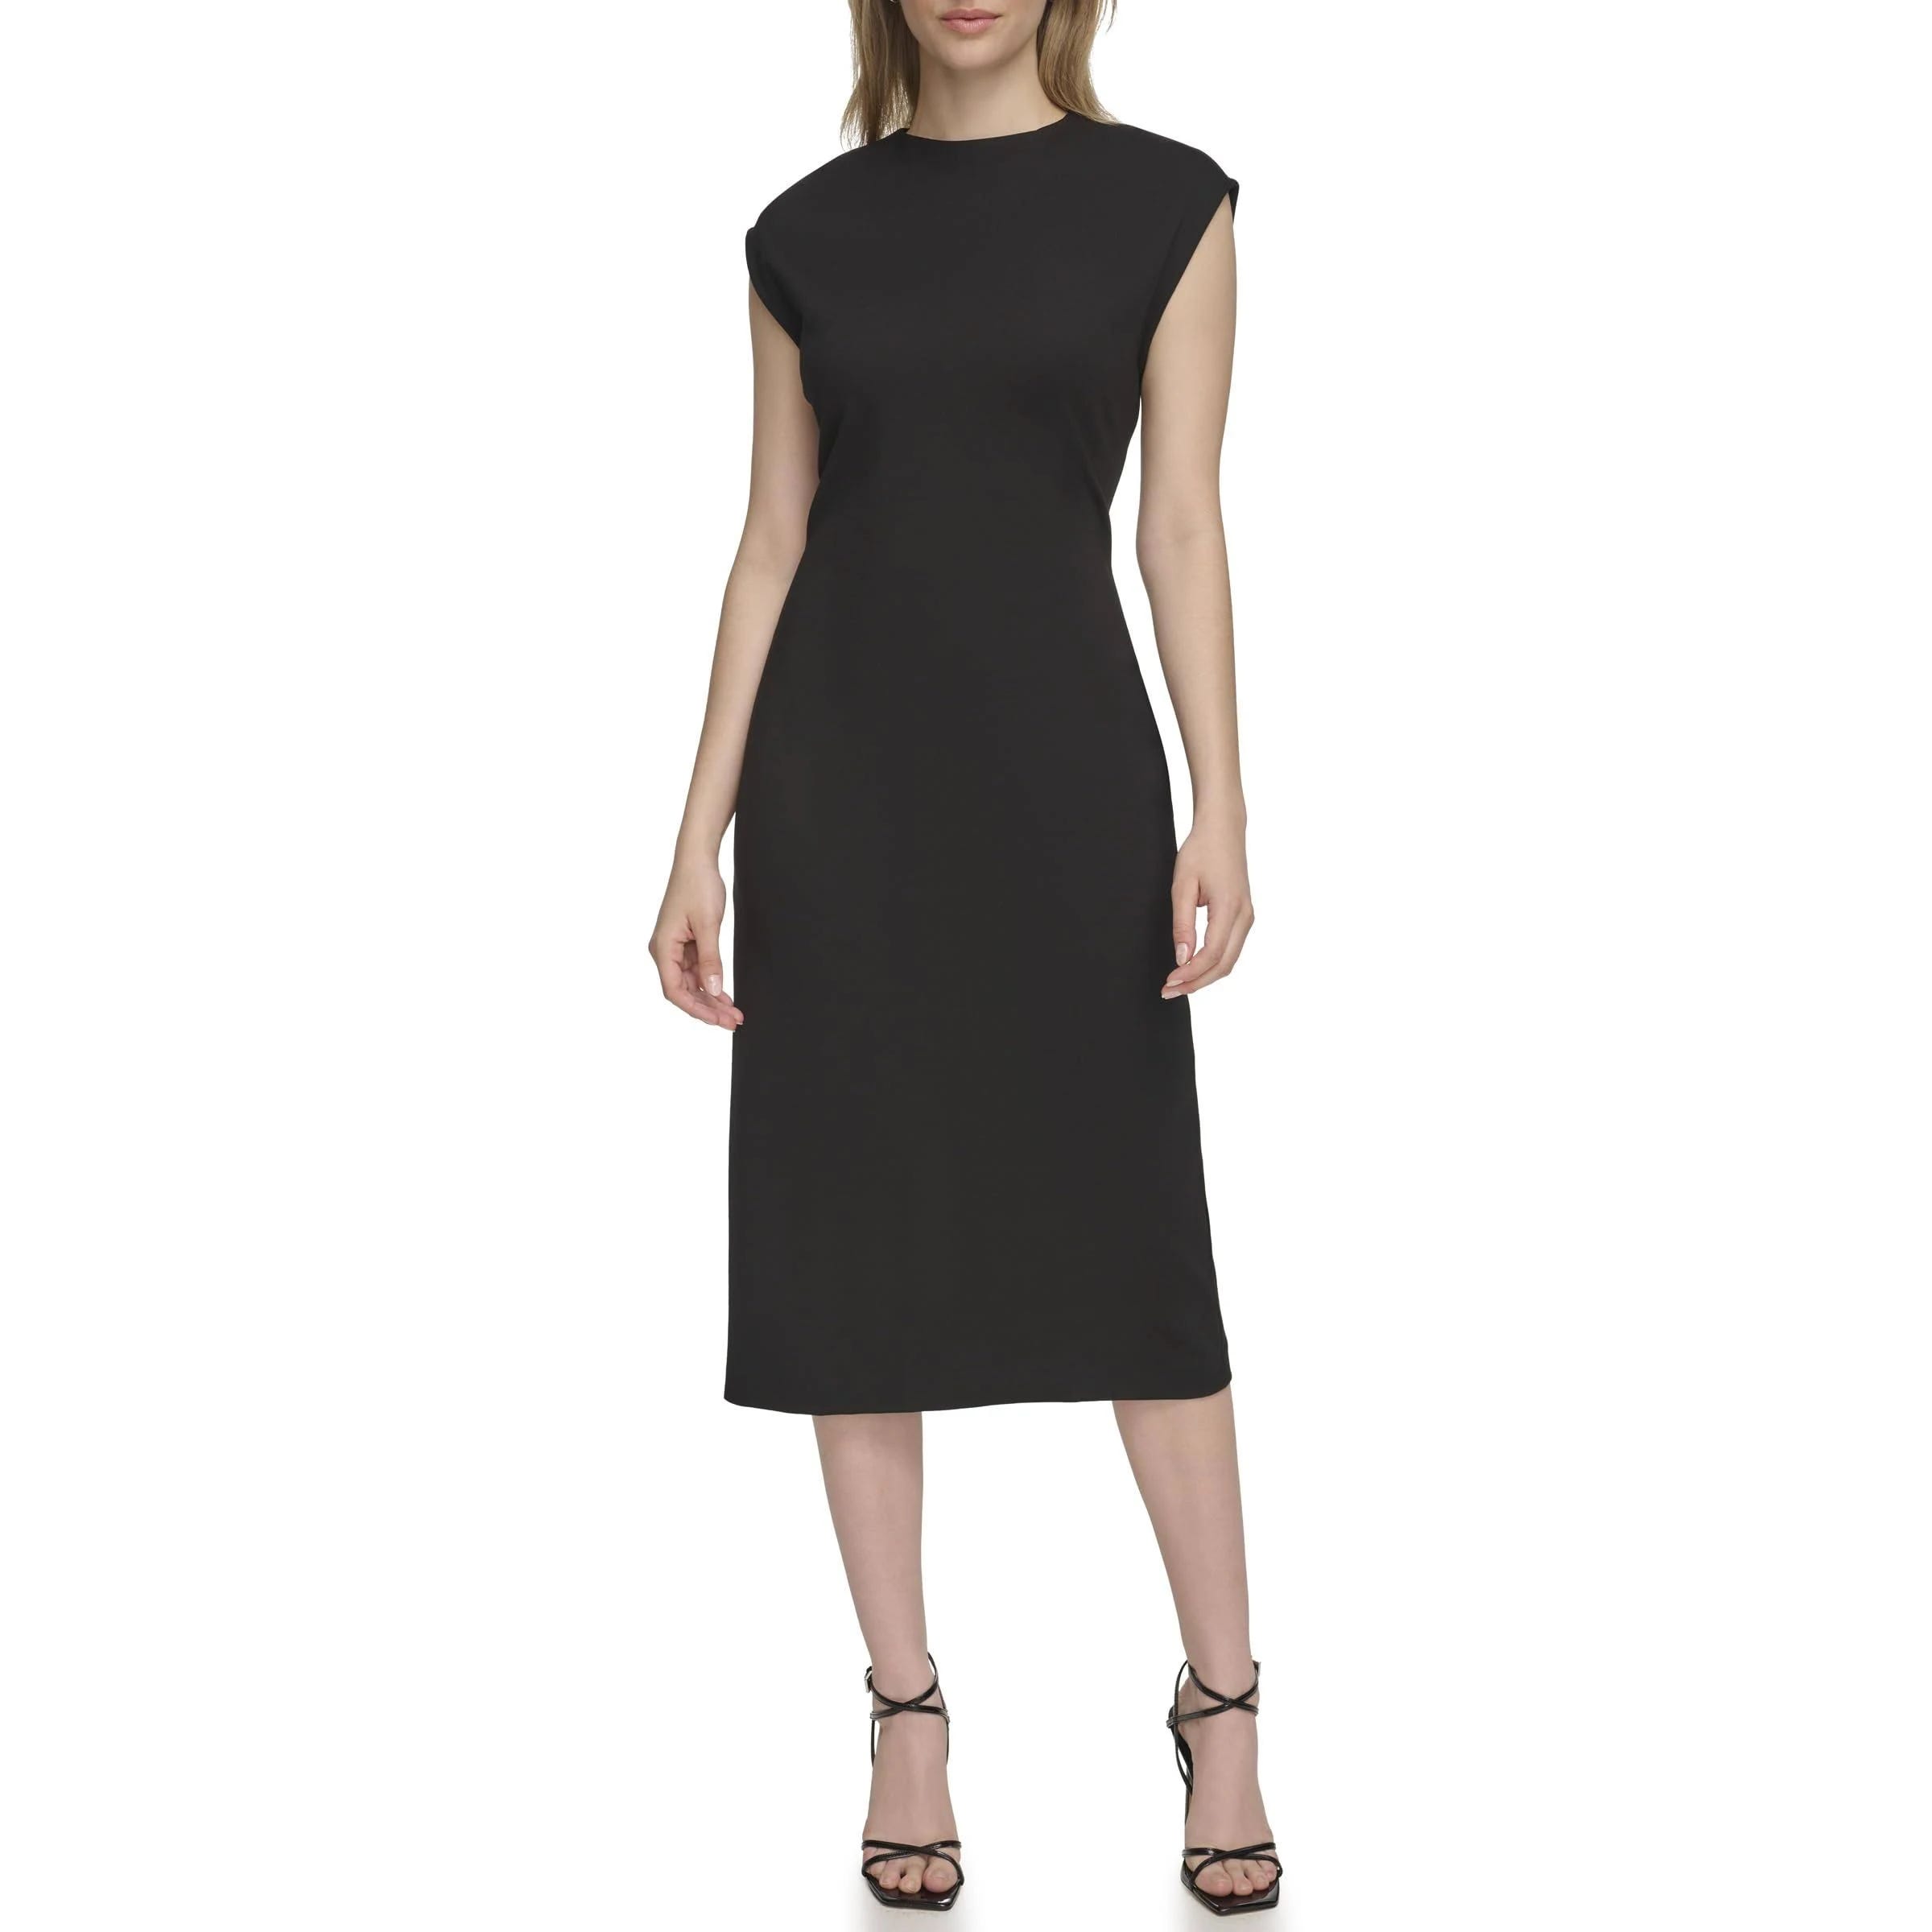 Trendy Midi Dress for Work with Stretch for Perfect Fit | Image